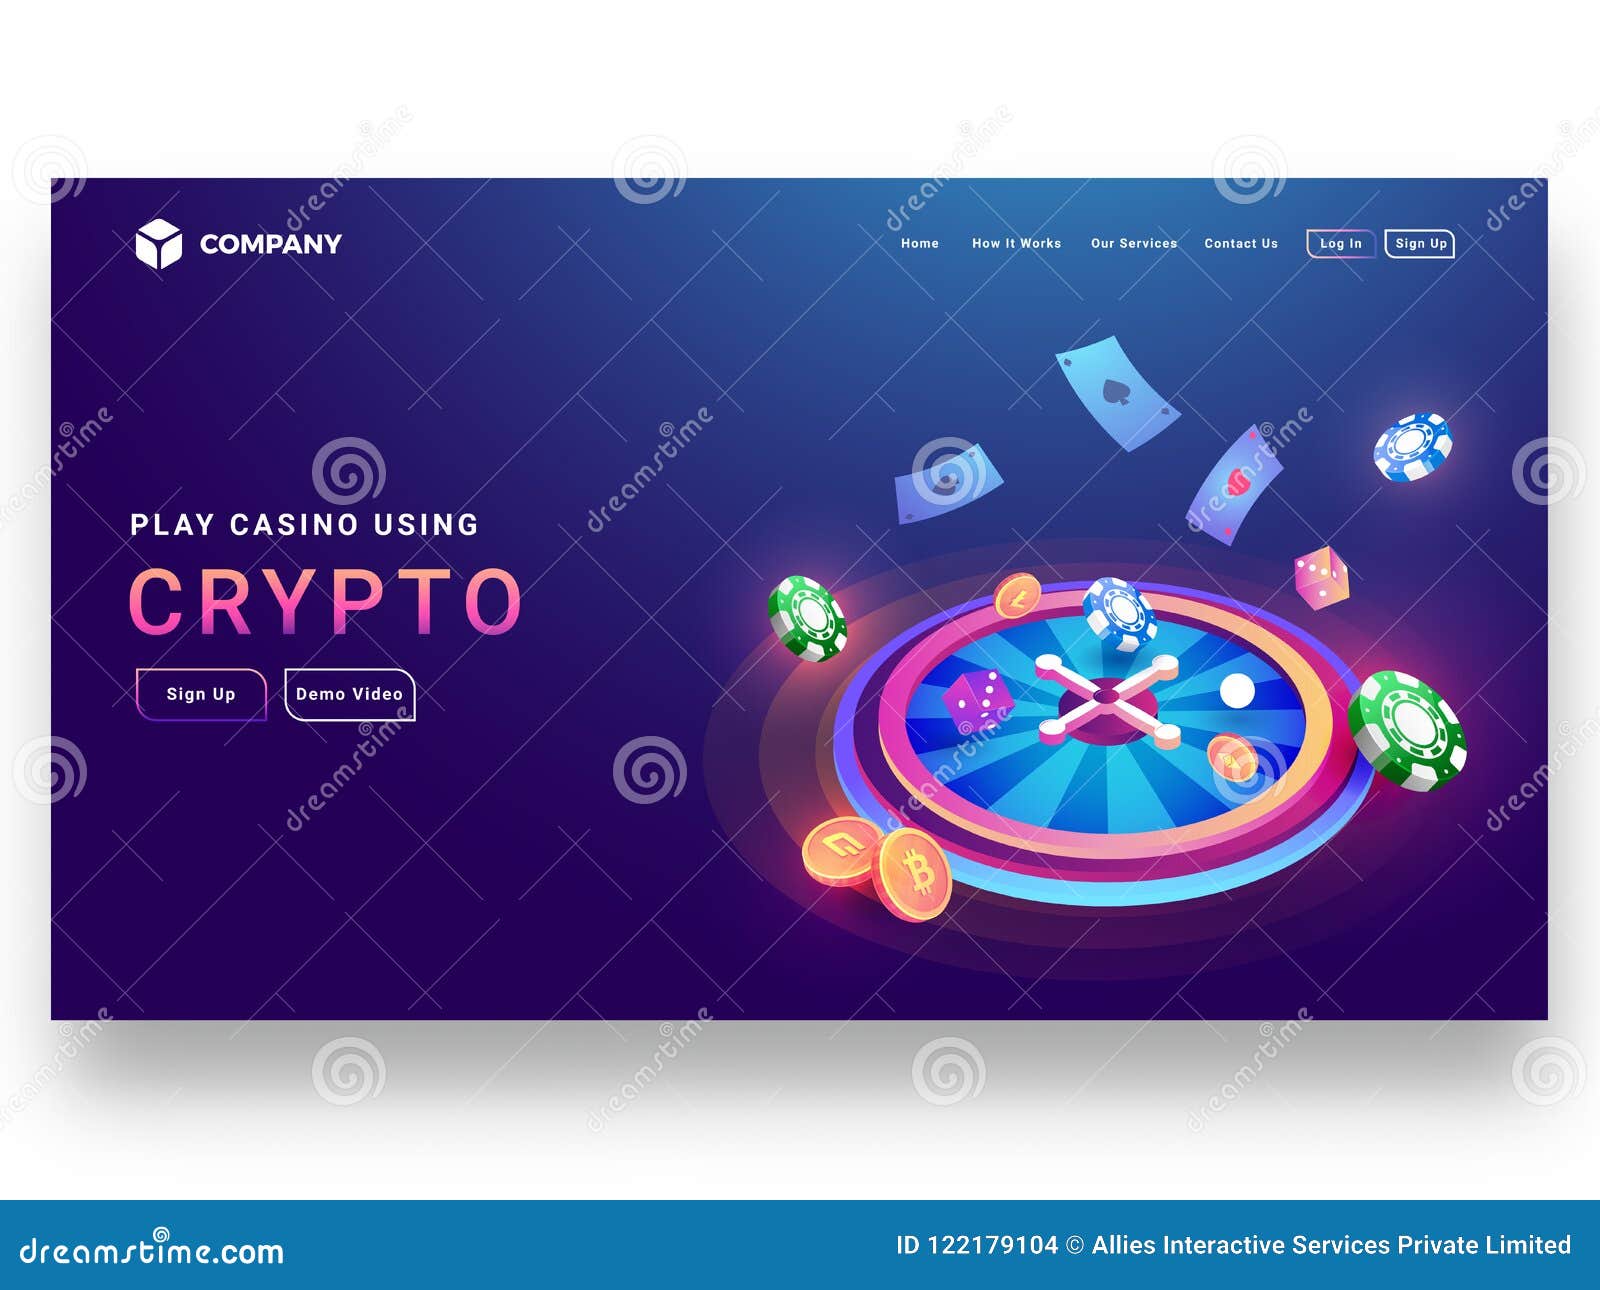 Finding Customers With Bitcoin Gambling Website